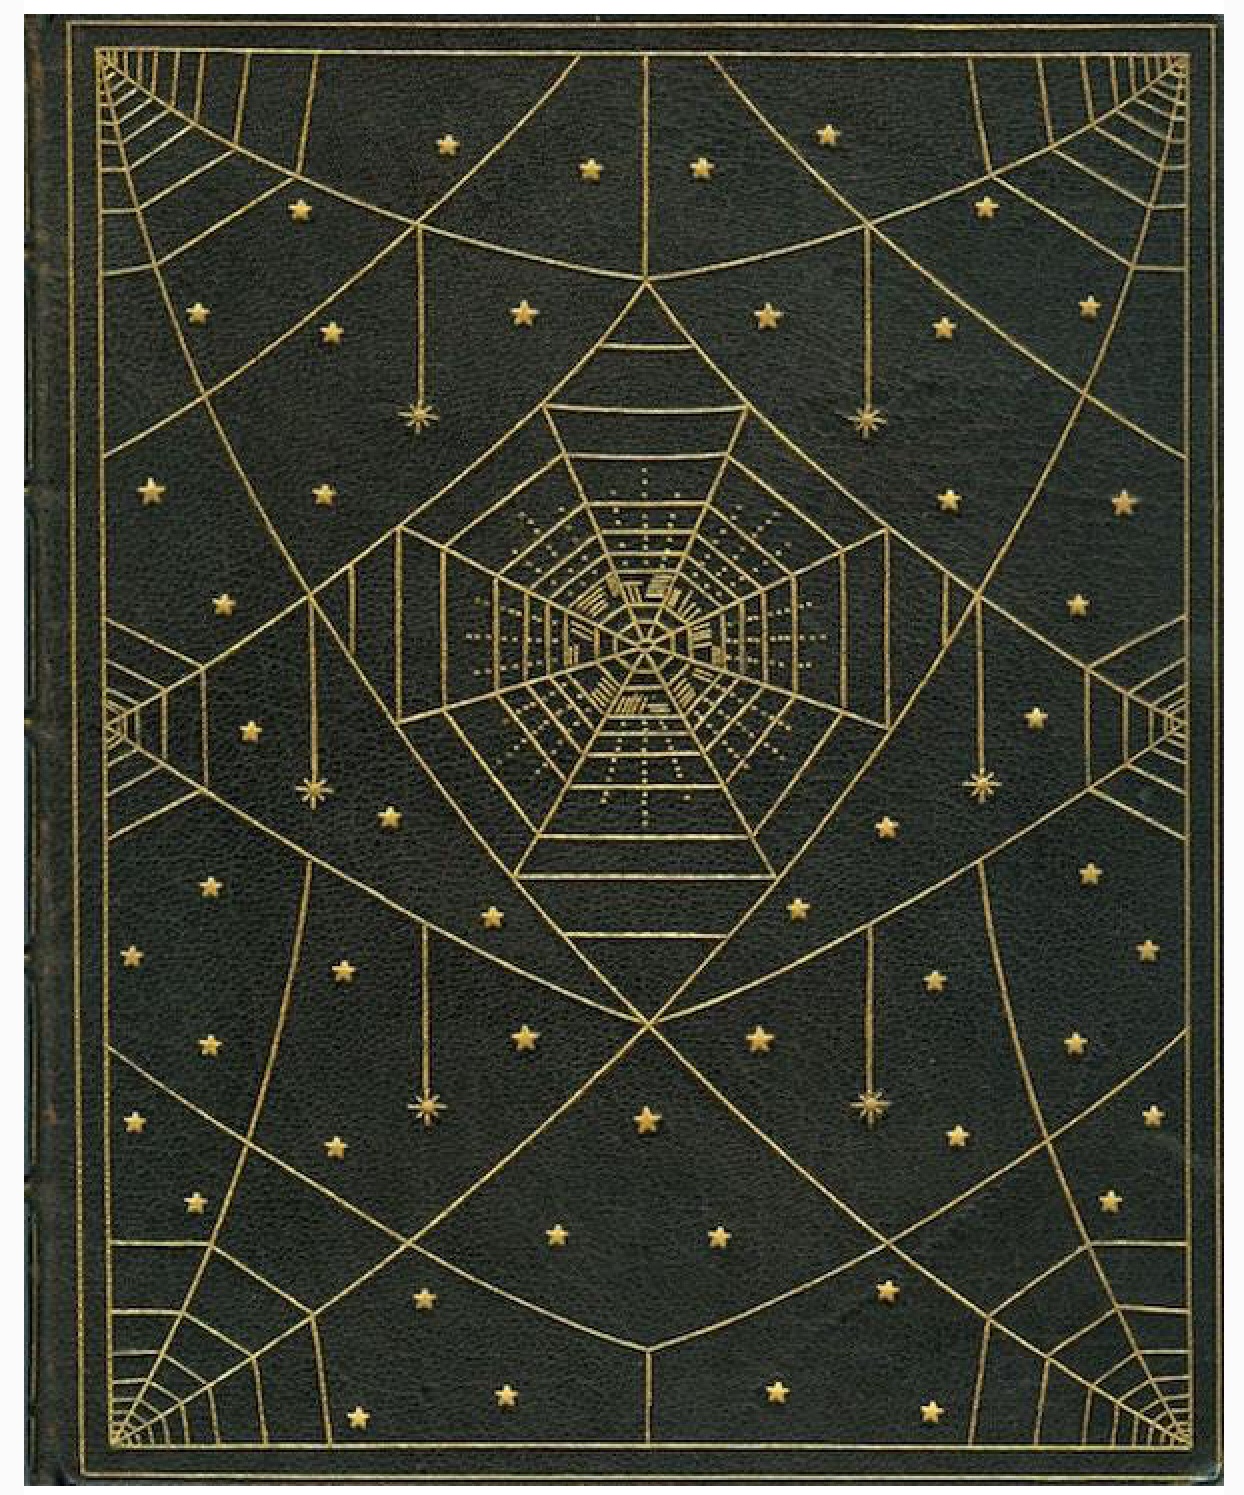 dark green book cover with gold cobweb and stars. some stars hanging from the web like spiders.